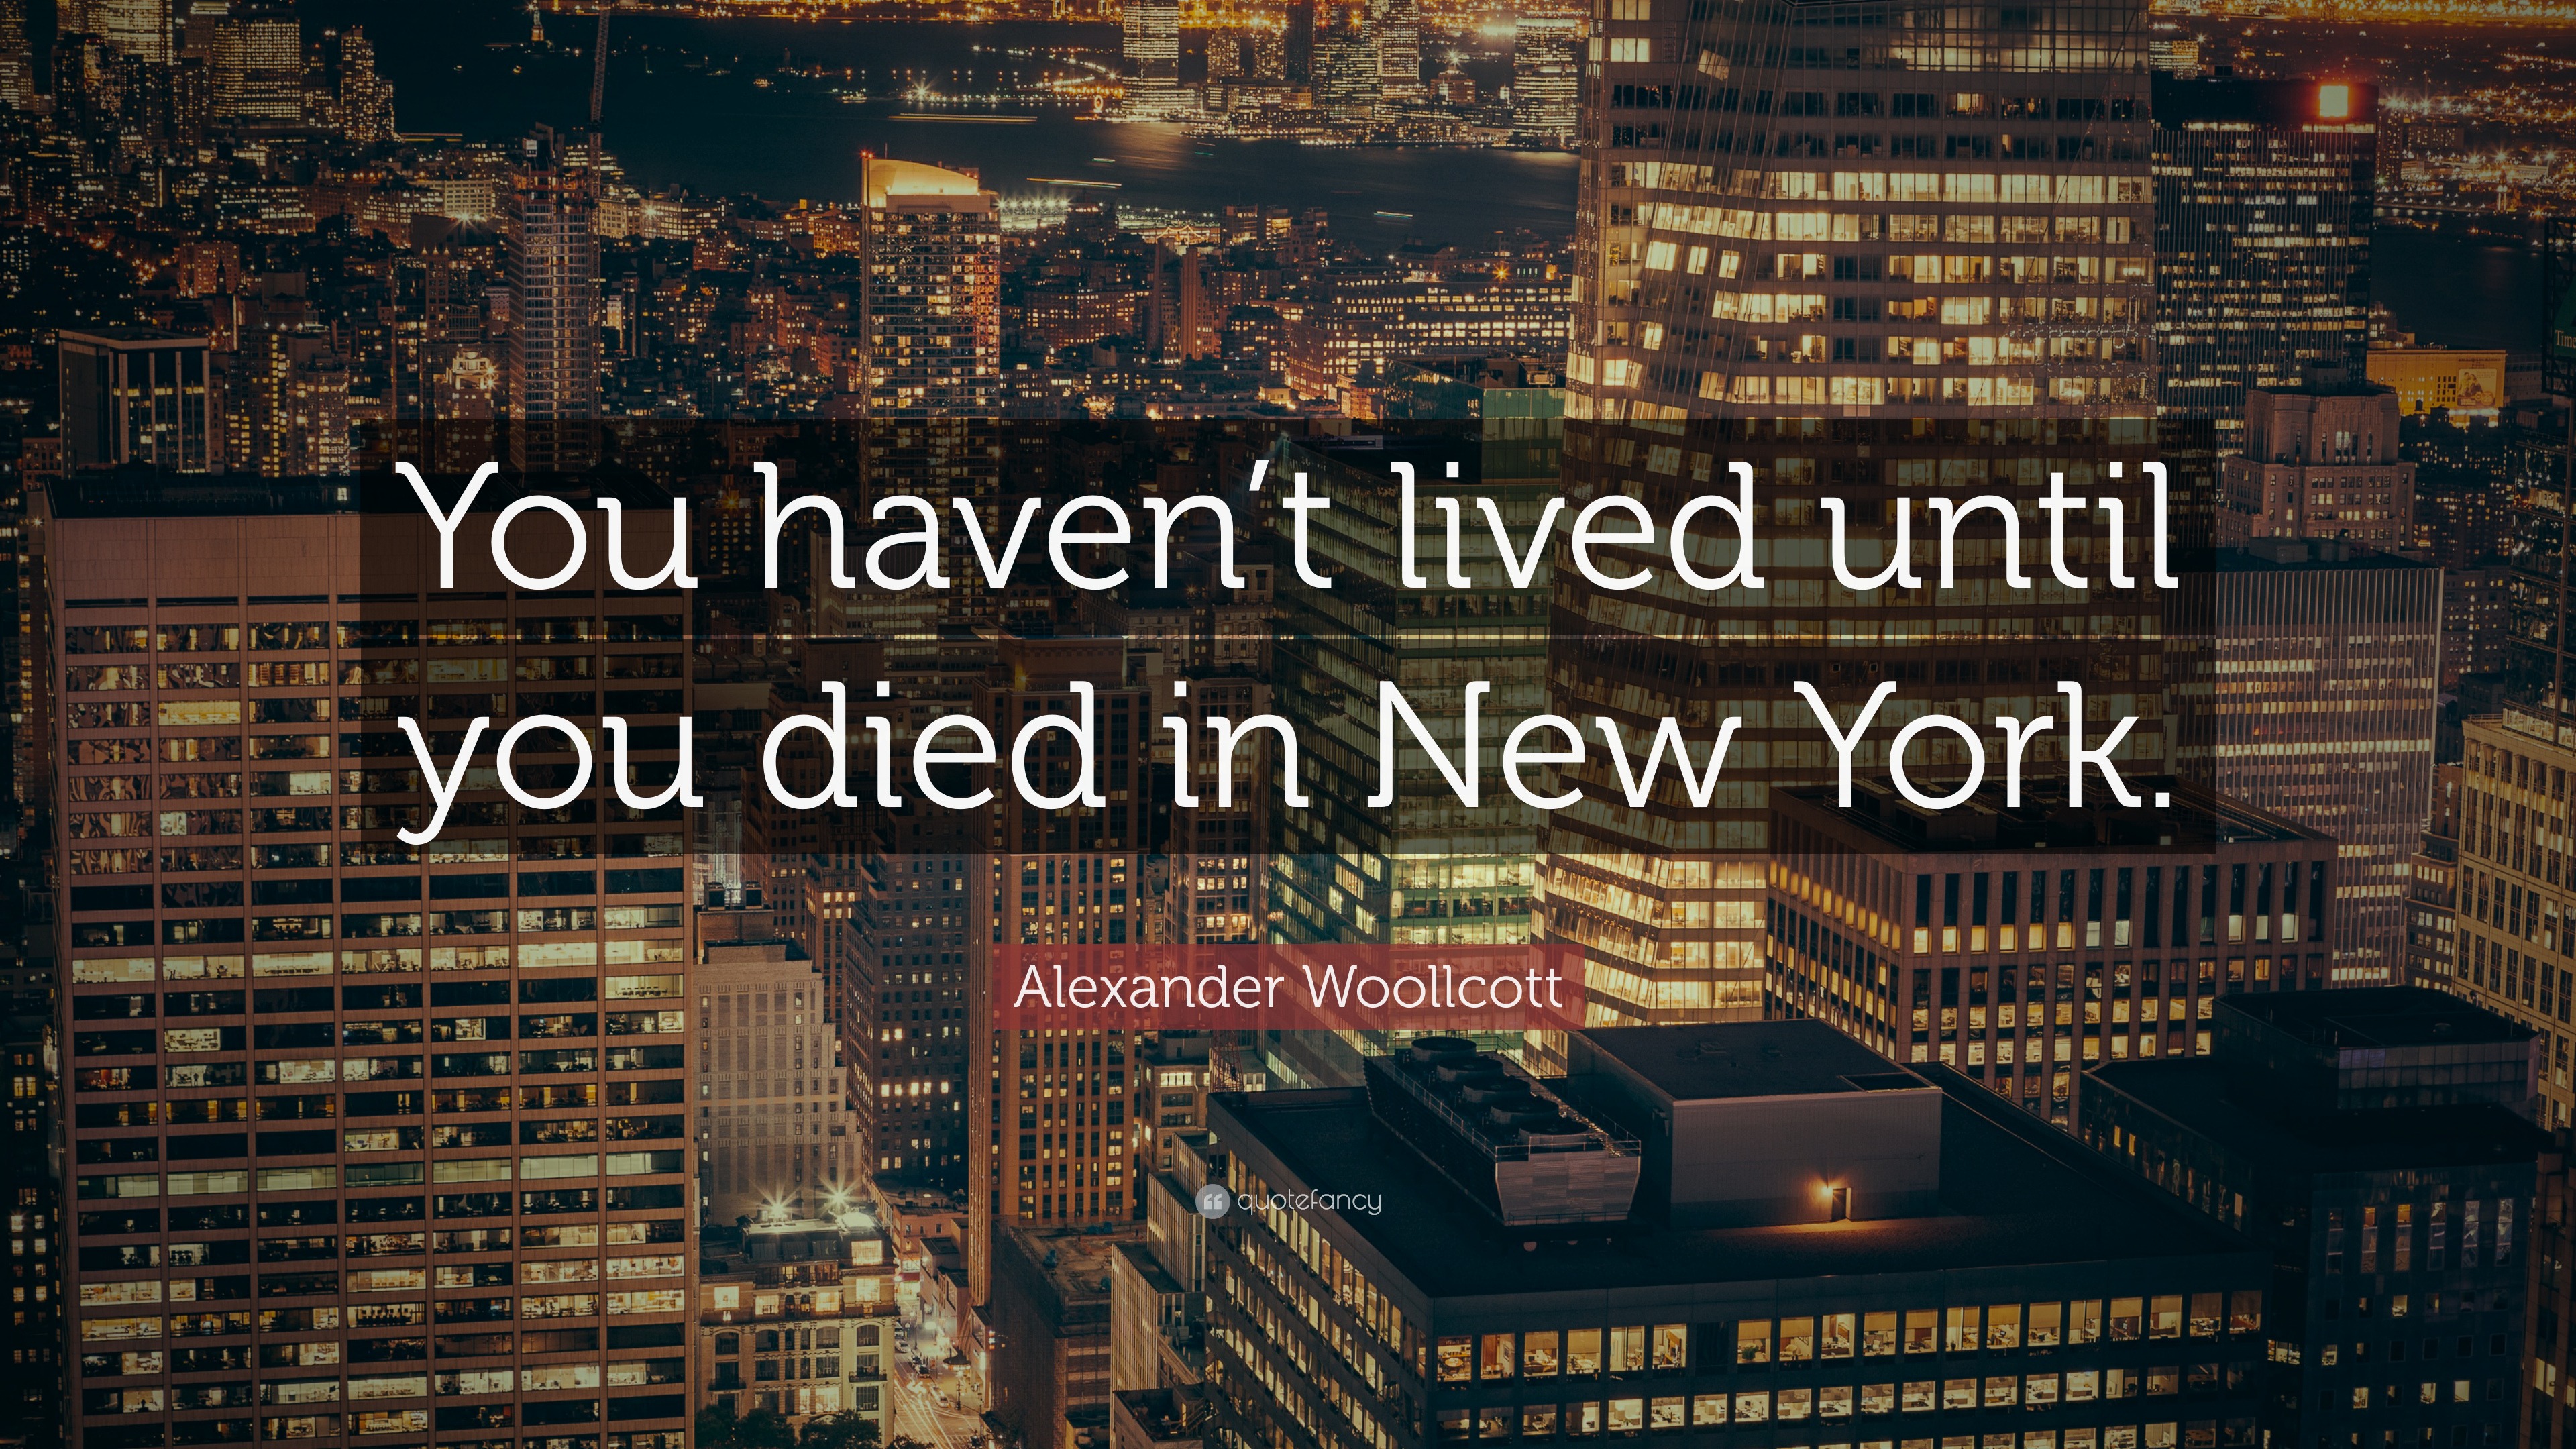 Quotes About New York (40 wallpapers) - Quotefancy